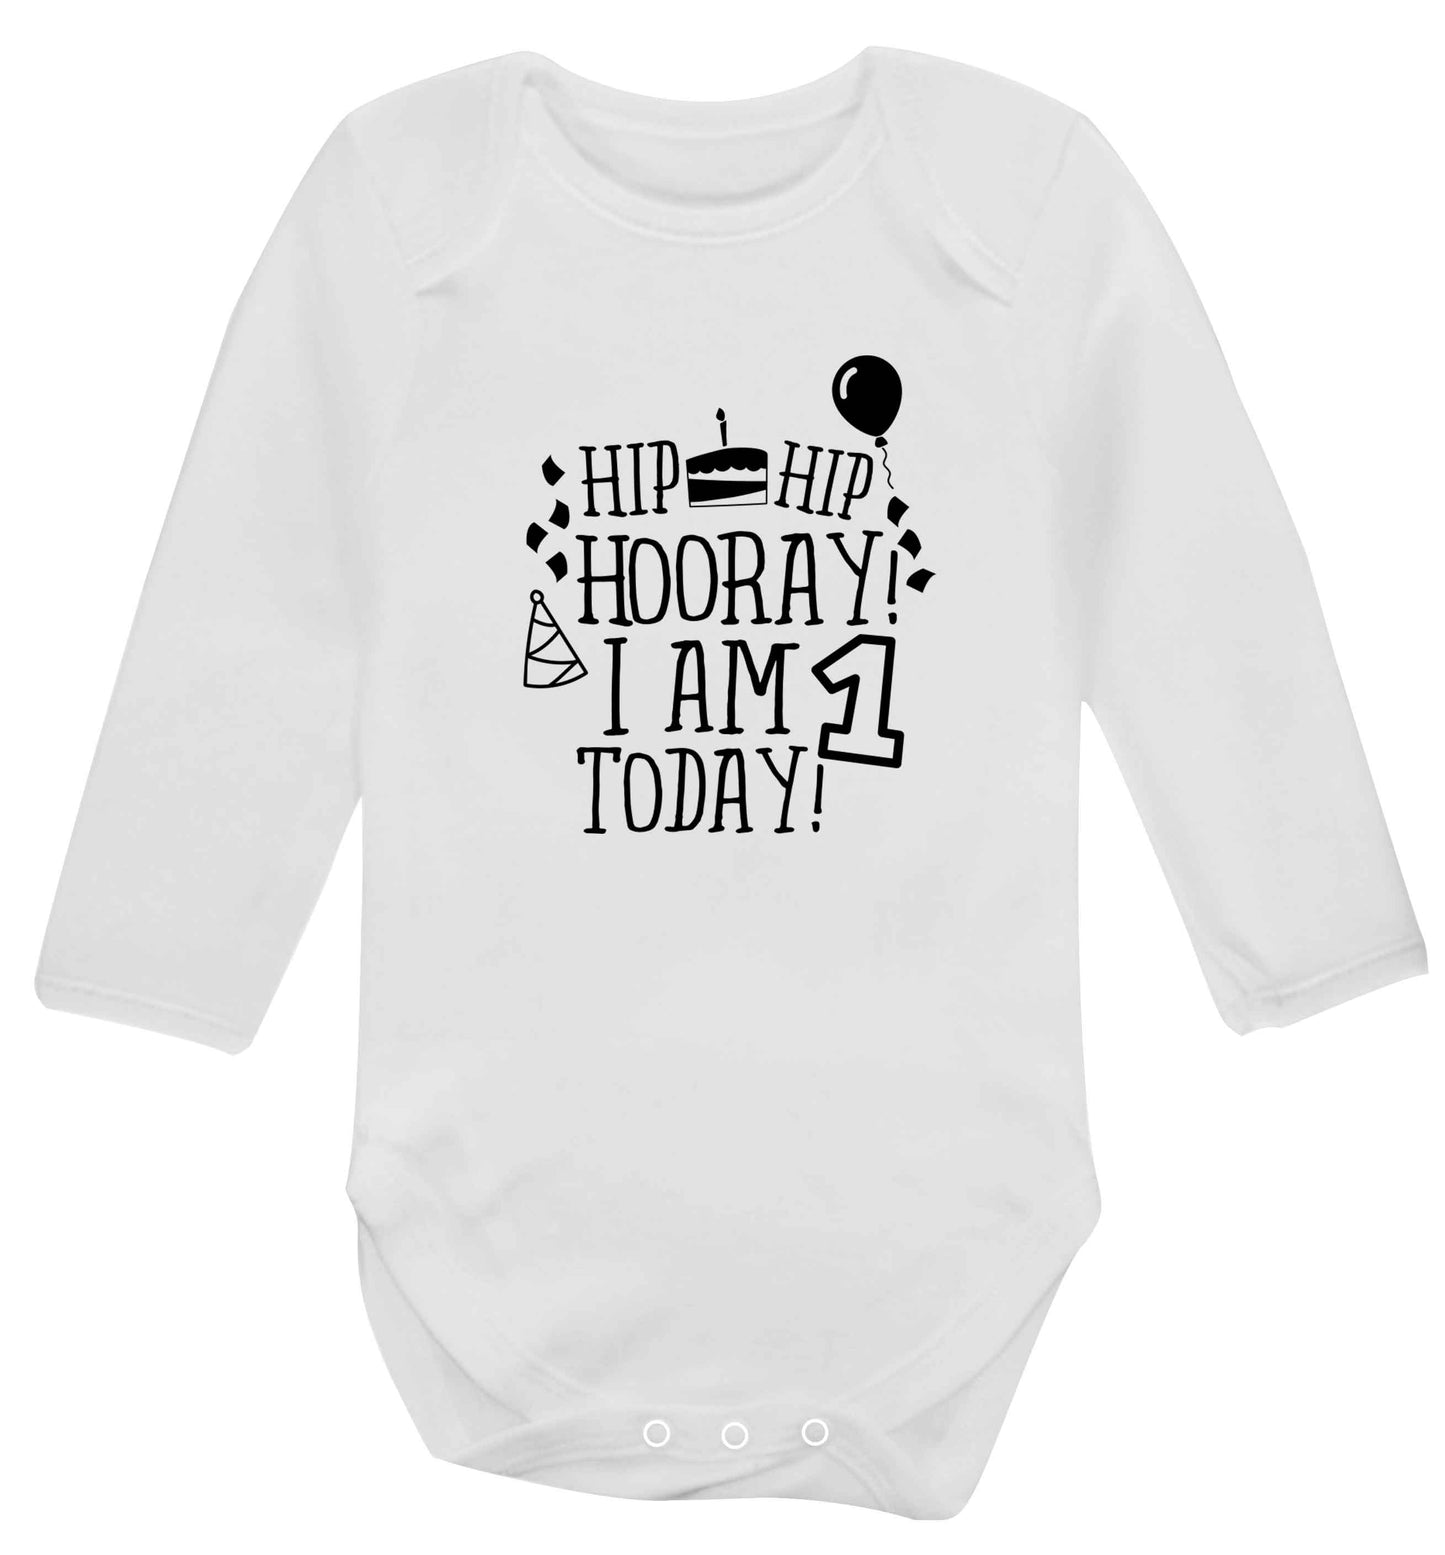 I am One Today baby vest long sleeved white 6-12 months